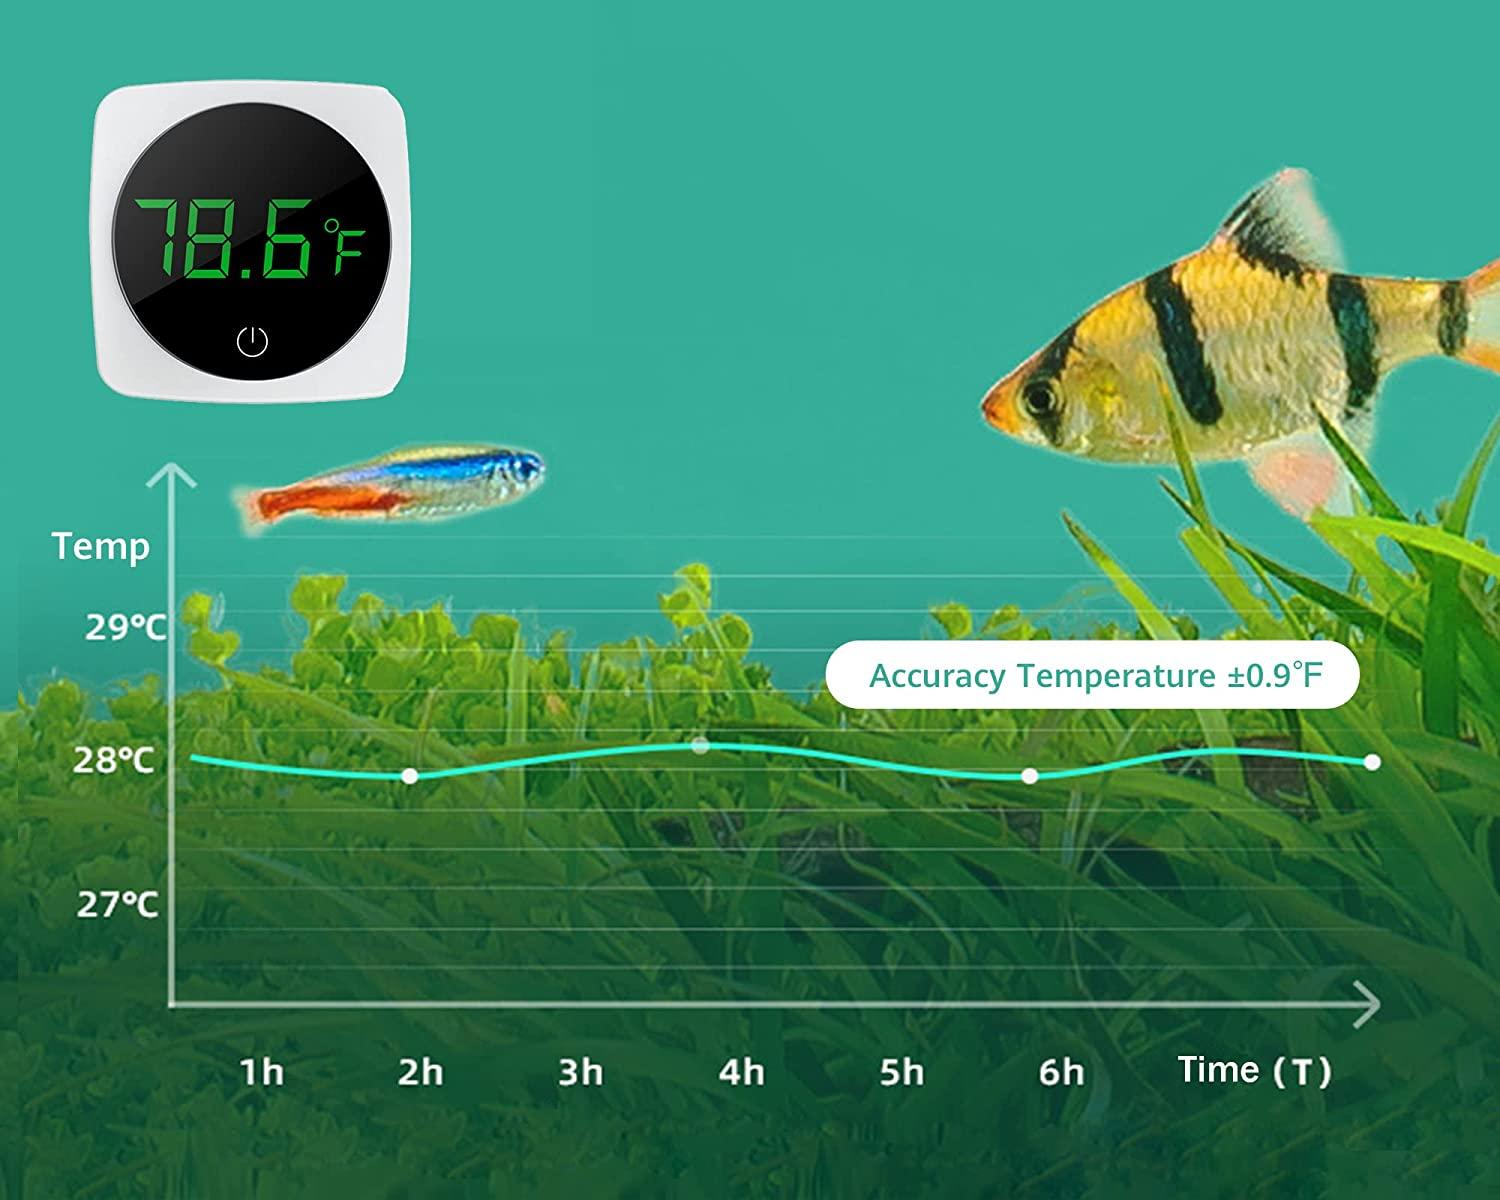 Digital Aquarium Thermometer, Fish Tank Thermometer with LED Disaplay, High  Accurate to 0.9F for Fish Axolotl Turtle Tank Temperature Measurement  Fahrenheit (Wireless) Square